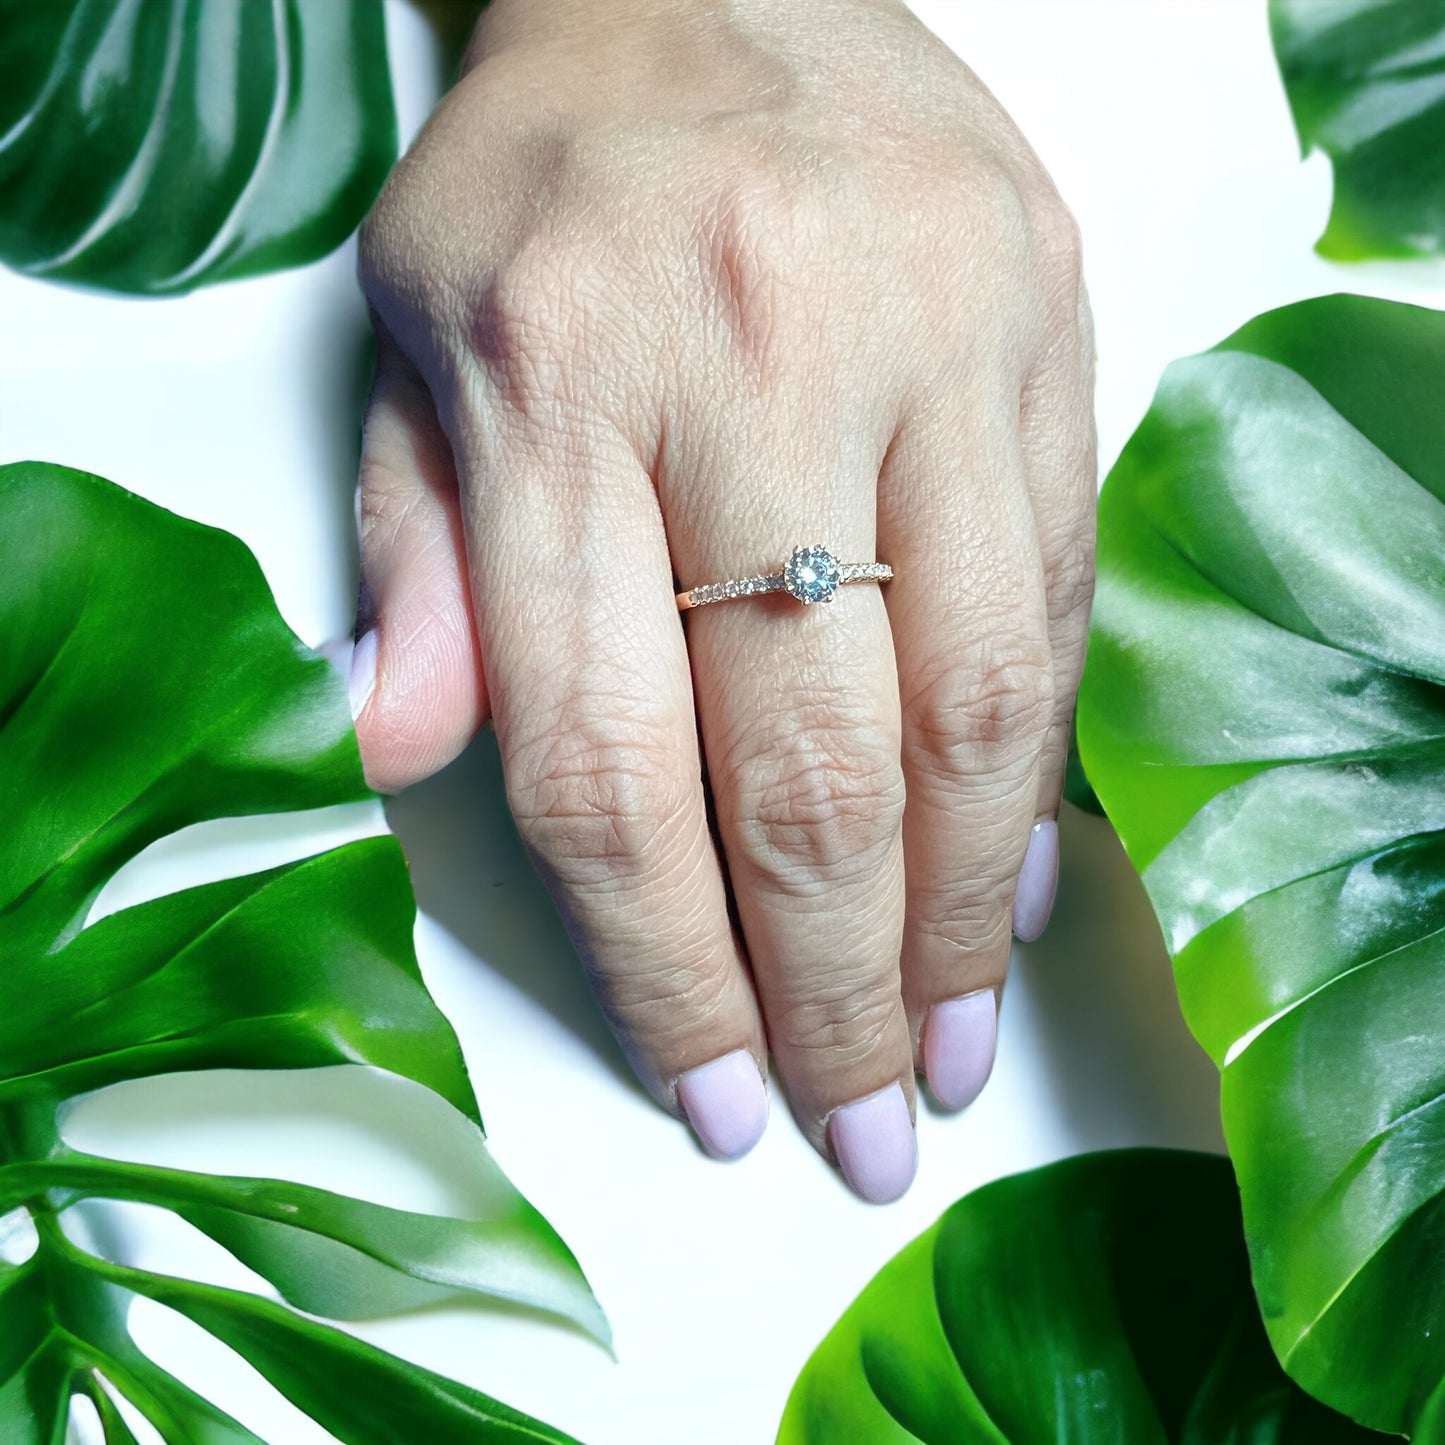 Suitable for Sensitive Skin Jewelry ,Effortless Style with Half Eternity Band ,Delicate Touch of Sparkle Ring